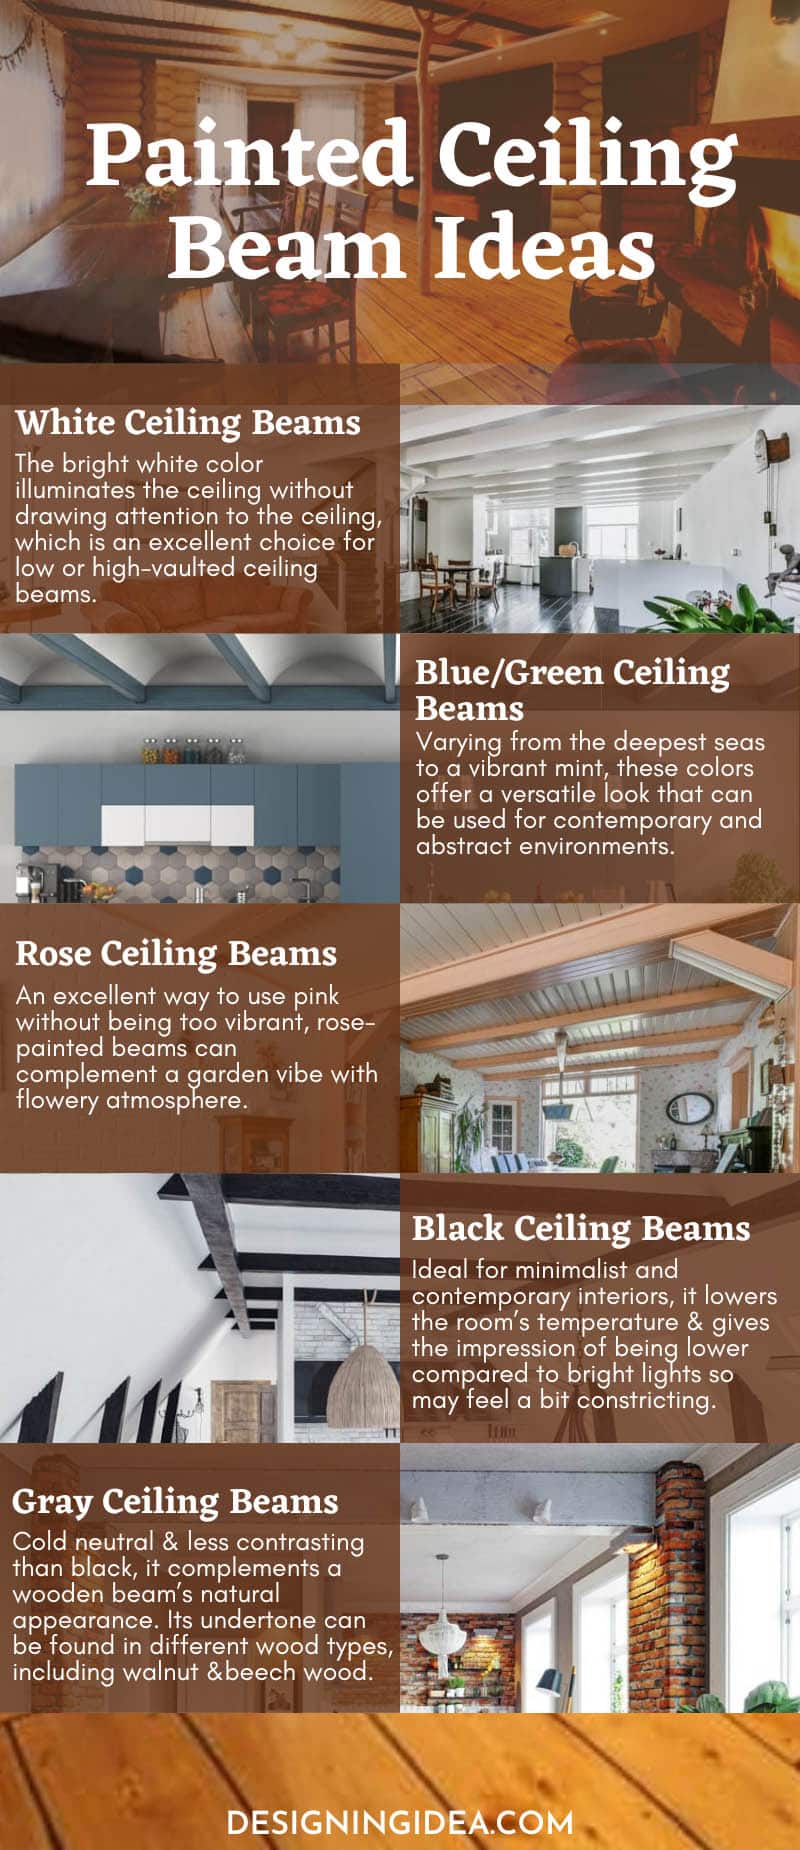 Painted ceiling boards and beam ideas infographic